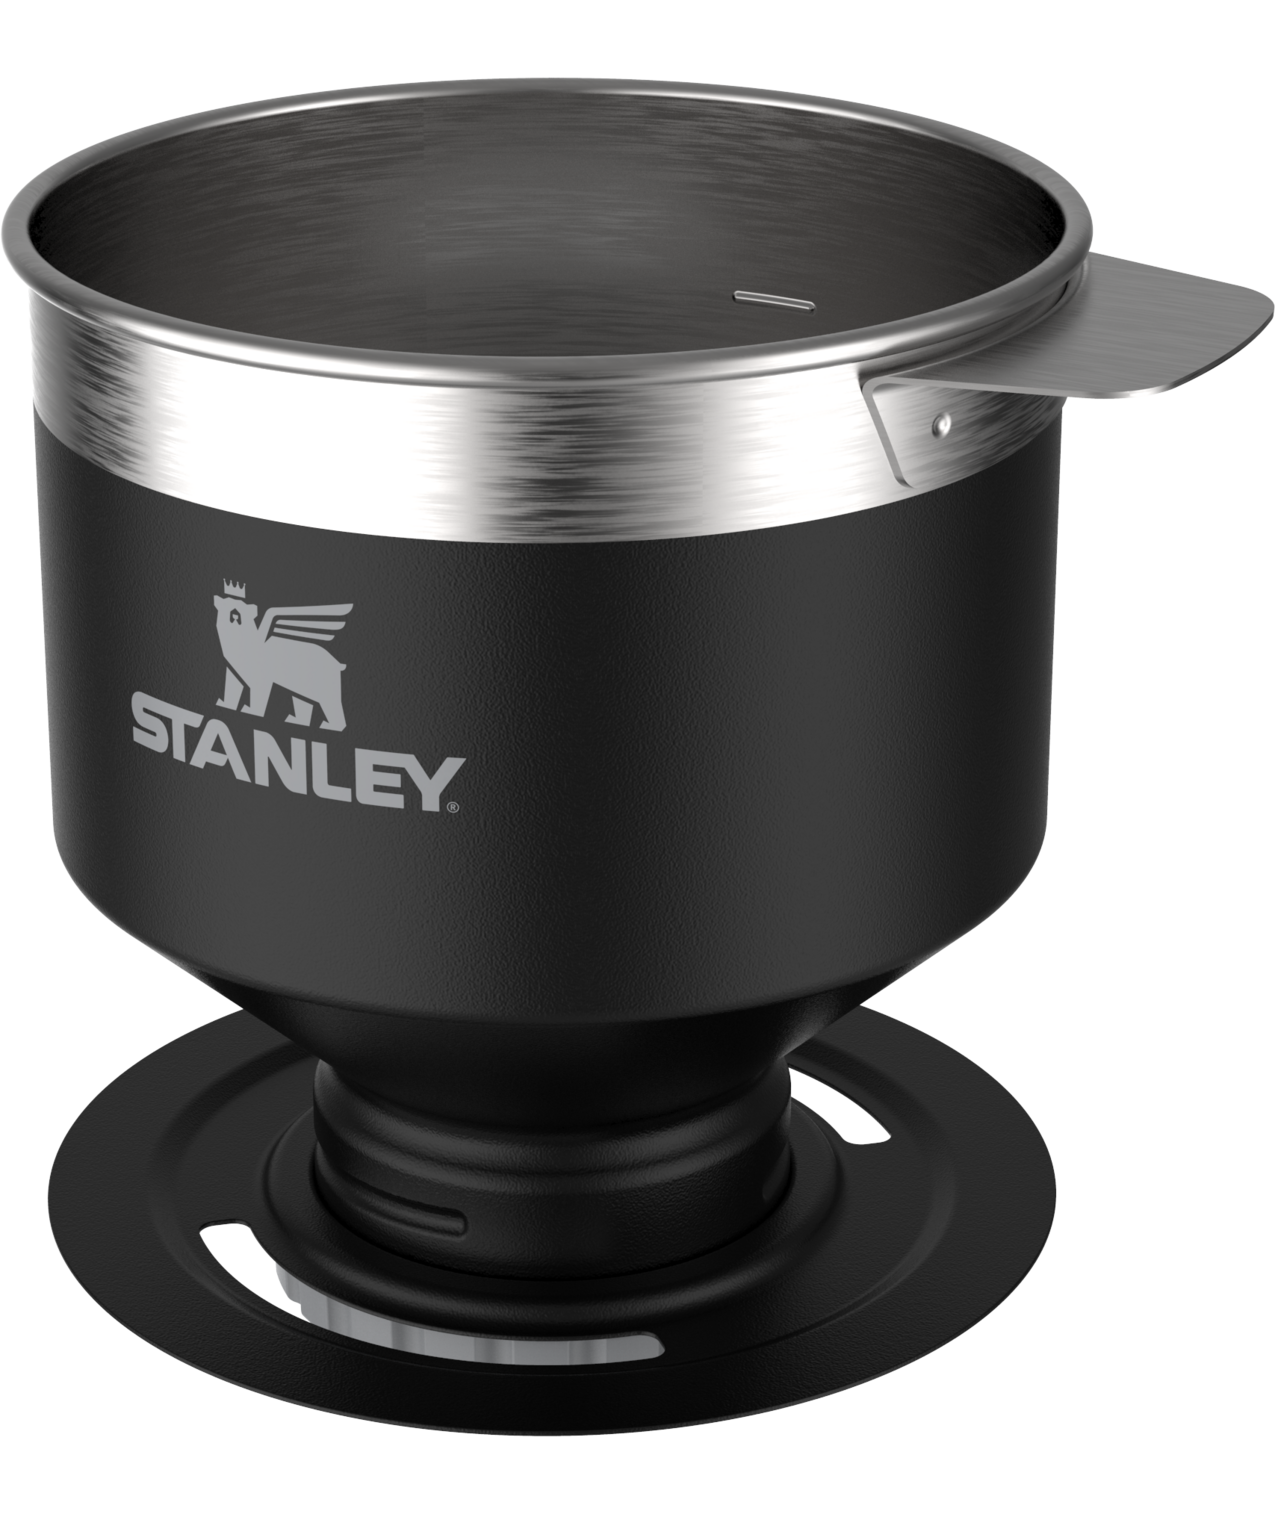 https://promotionway.com/data/shopproducts/9272/stanley-the-perfect-brew-pour-over.png